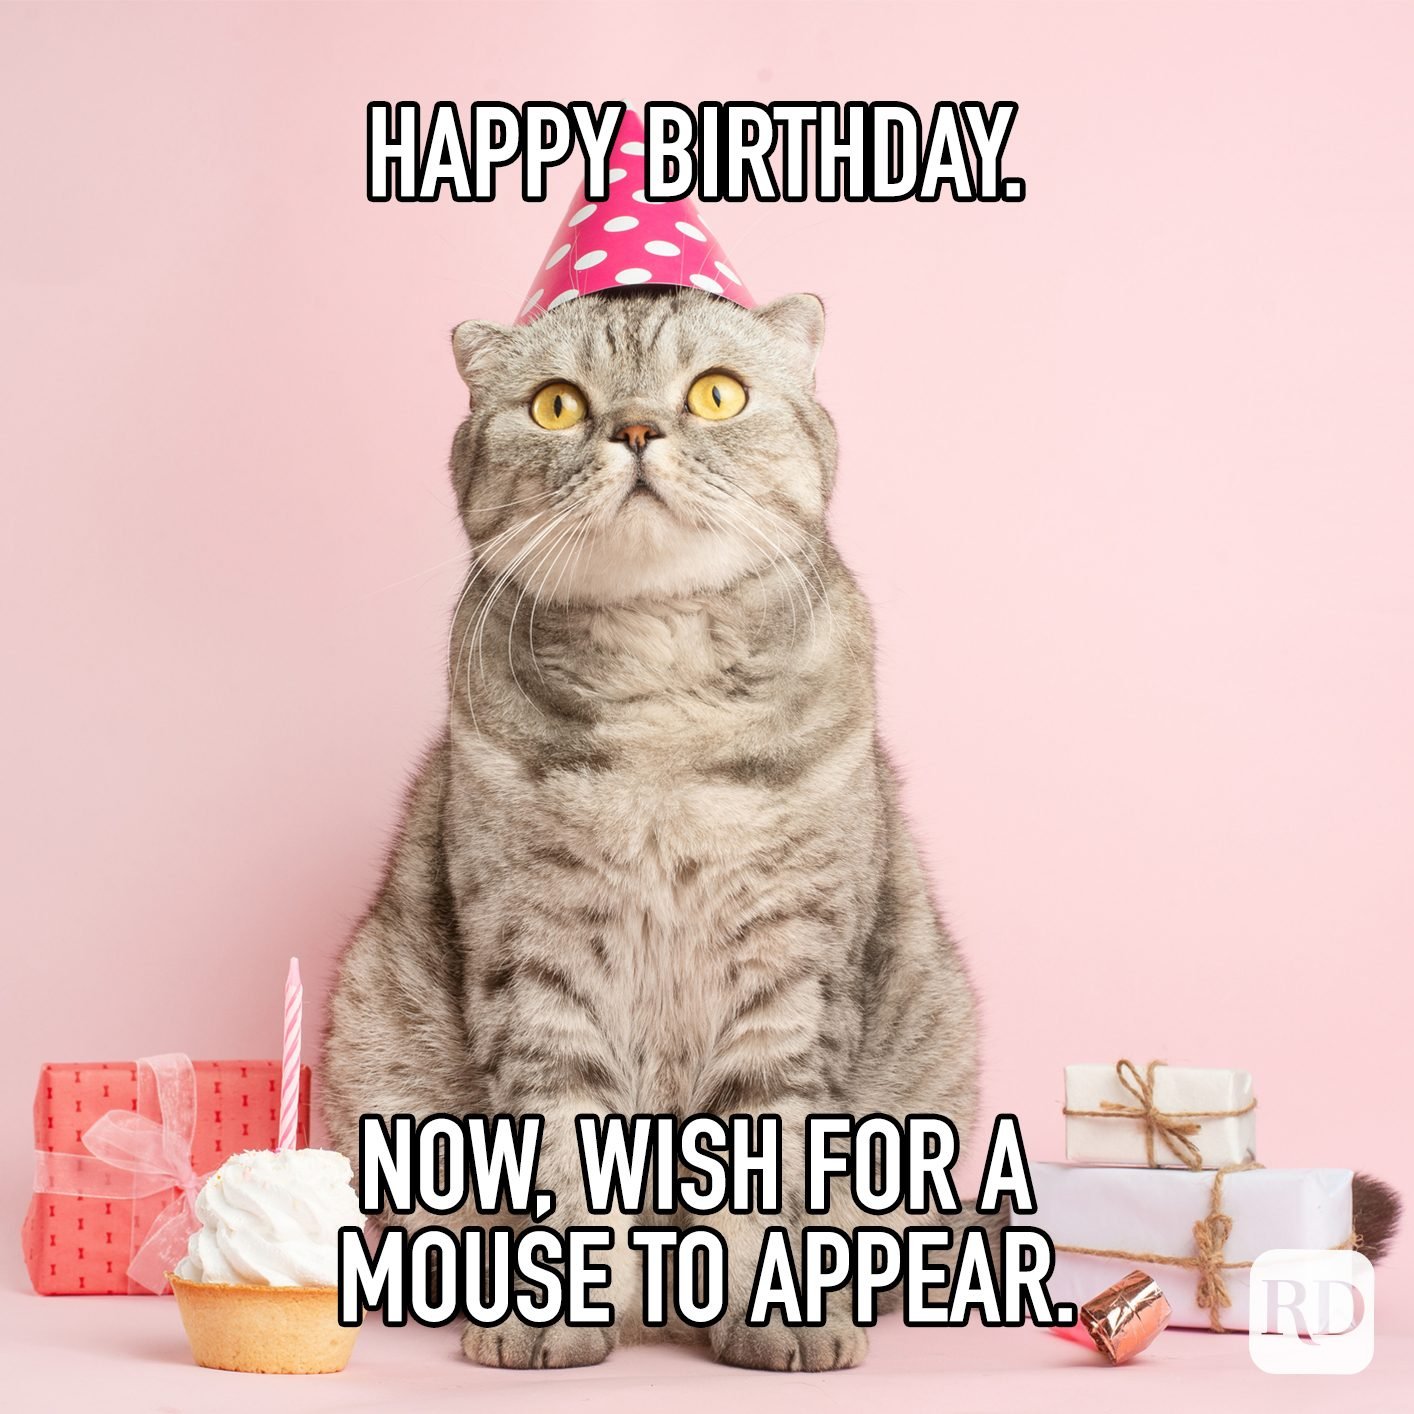 Happy Birthday Now Wish For A Mouse To Appear Meme